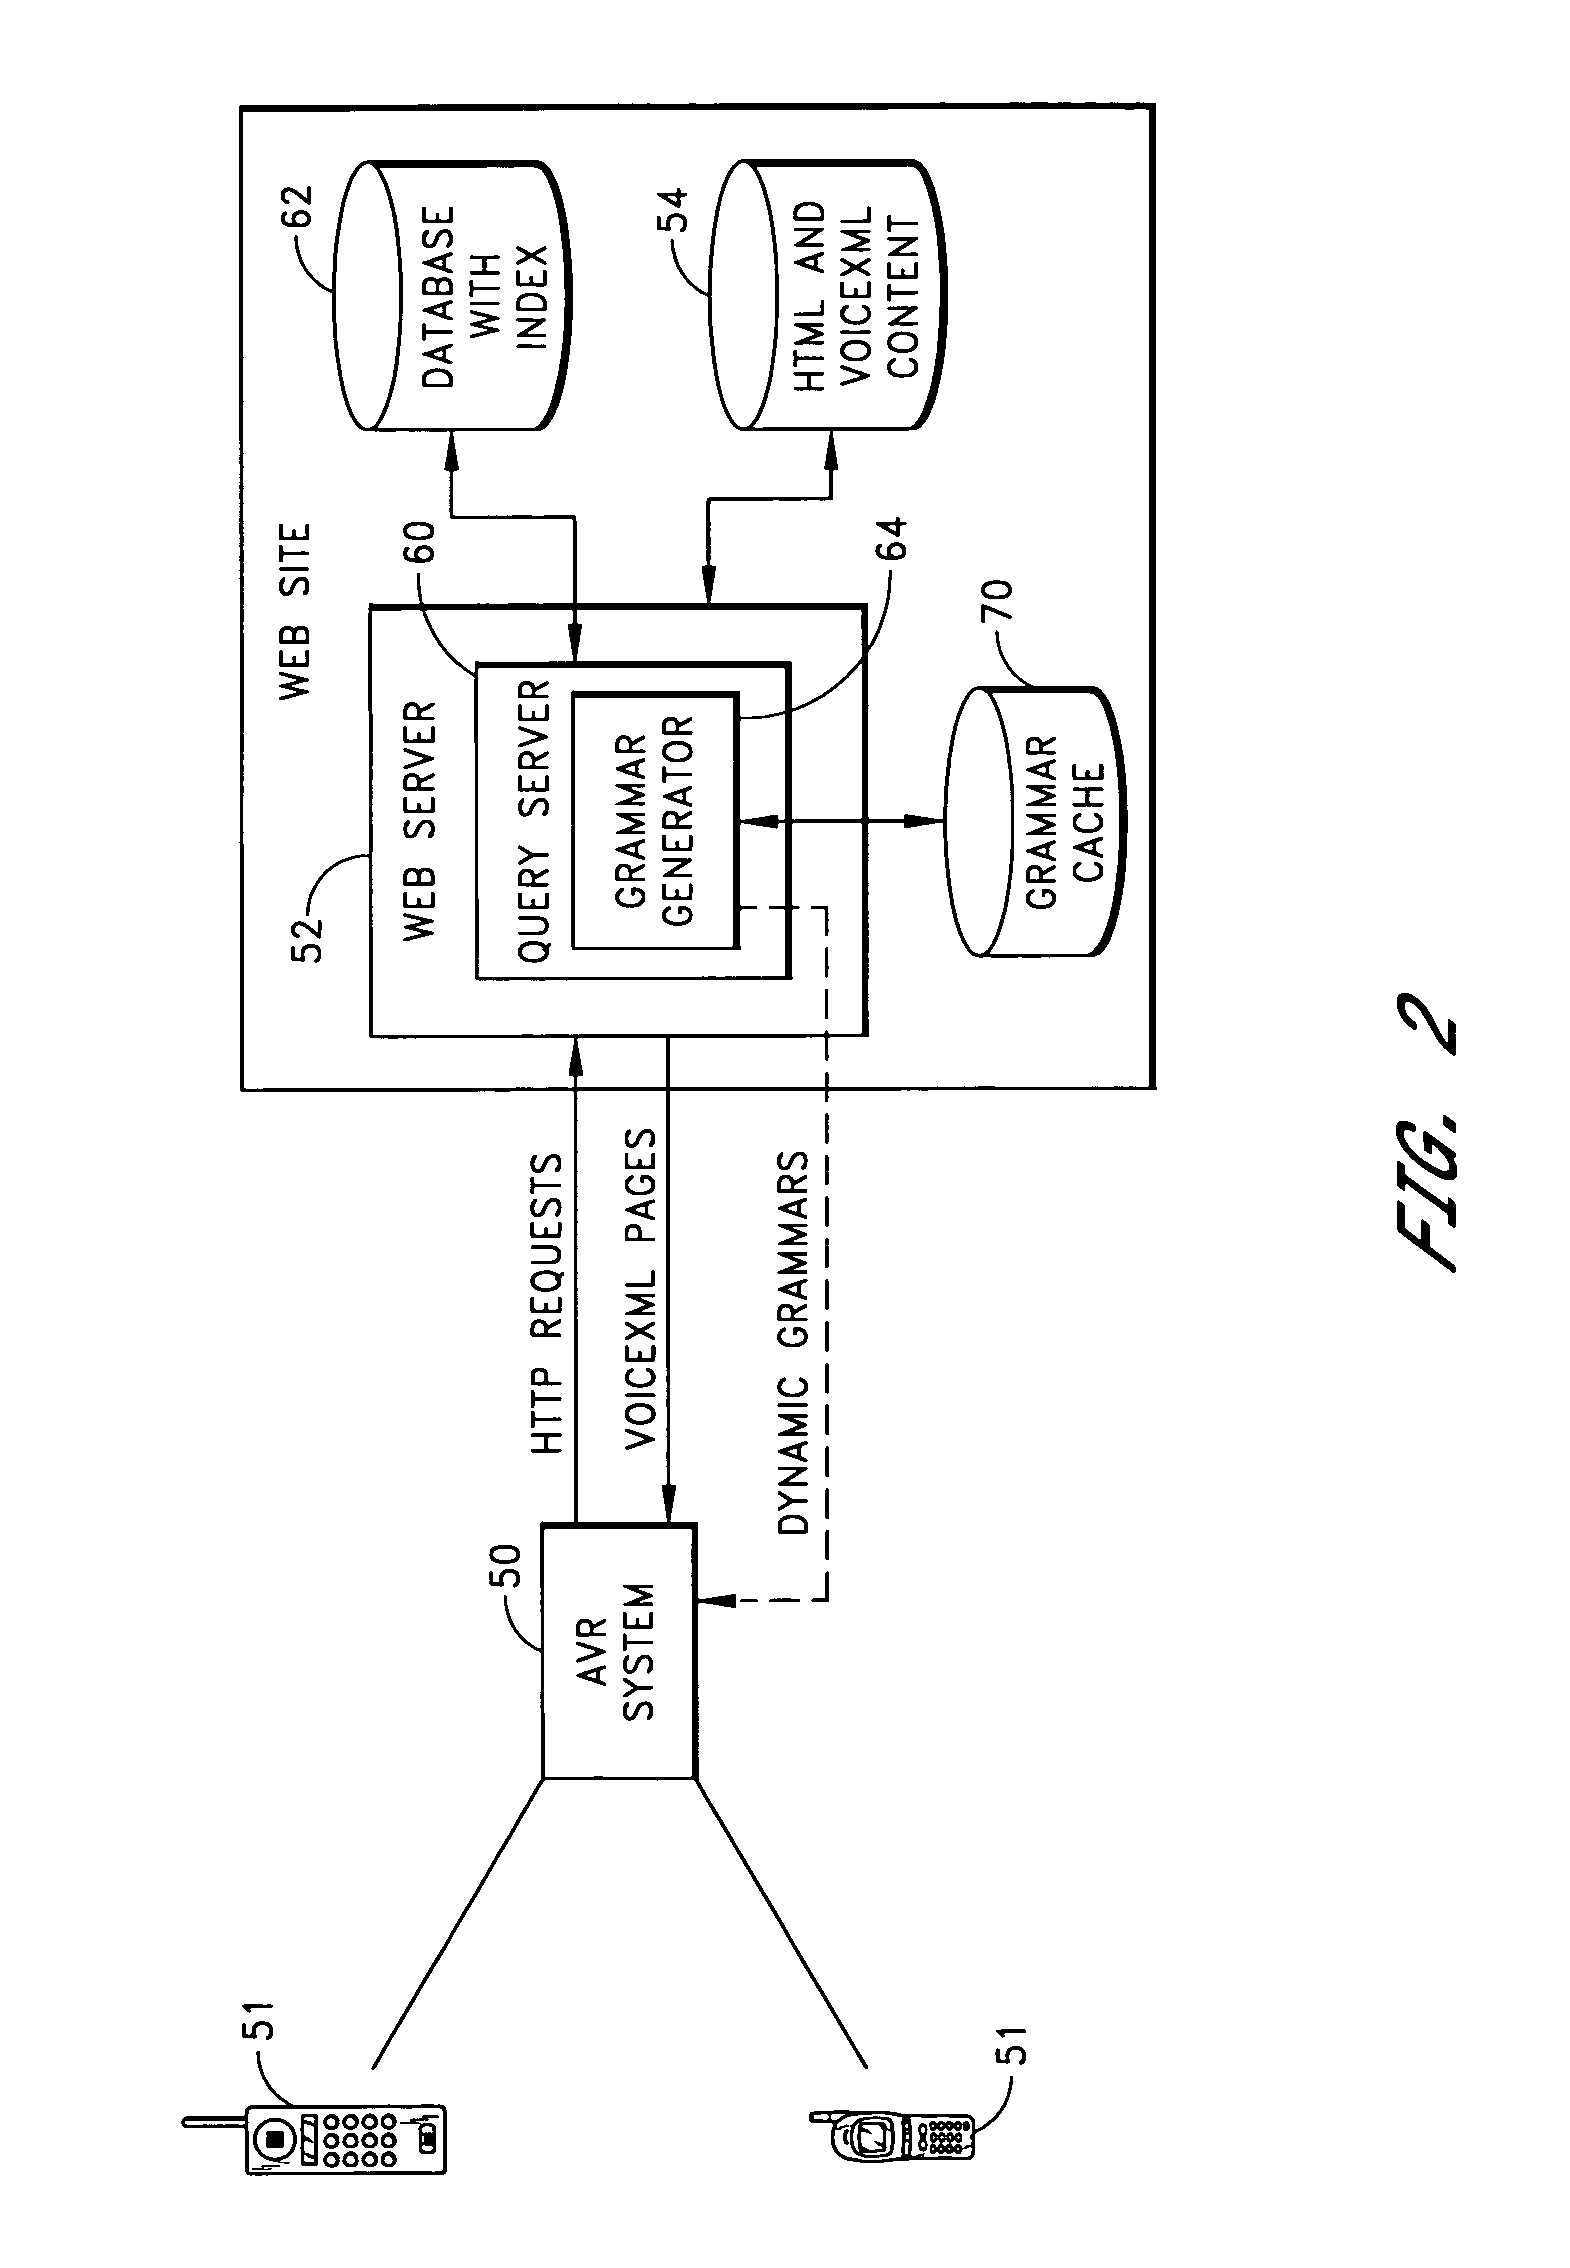 Voice interface and methods for improving recognition accuracy of voice search queries